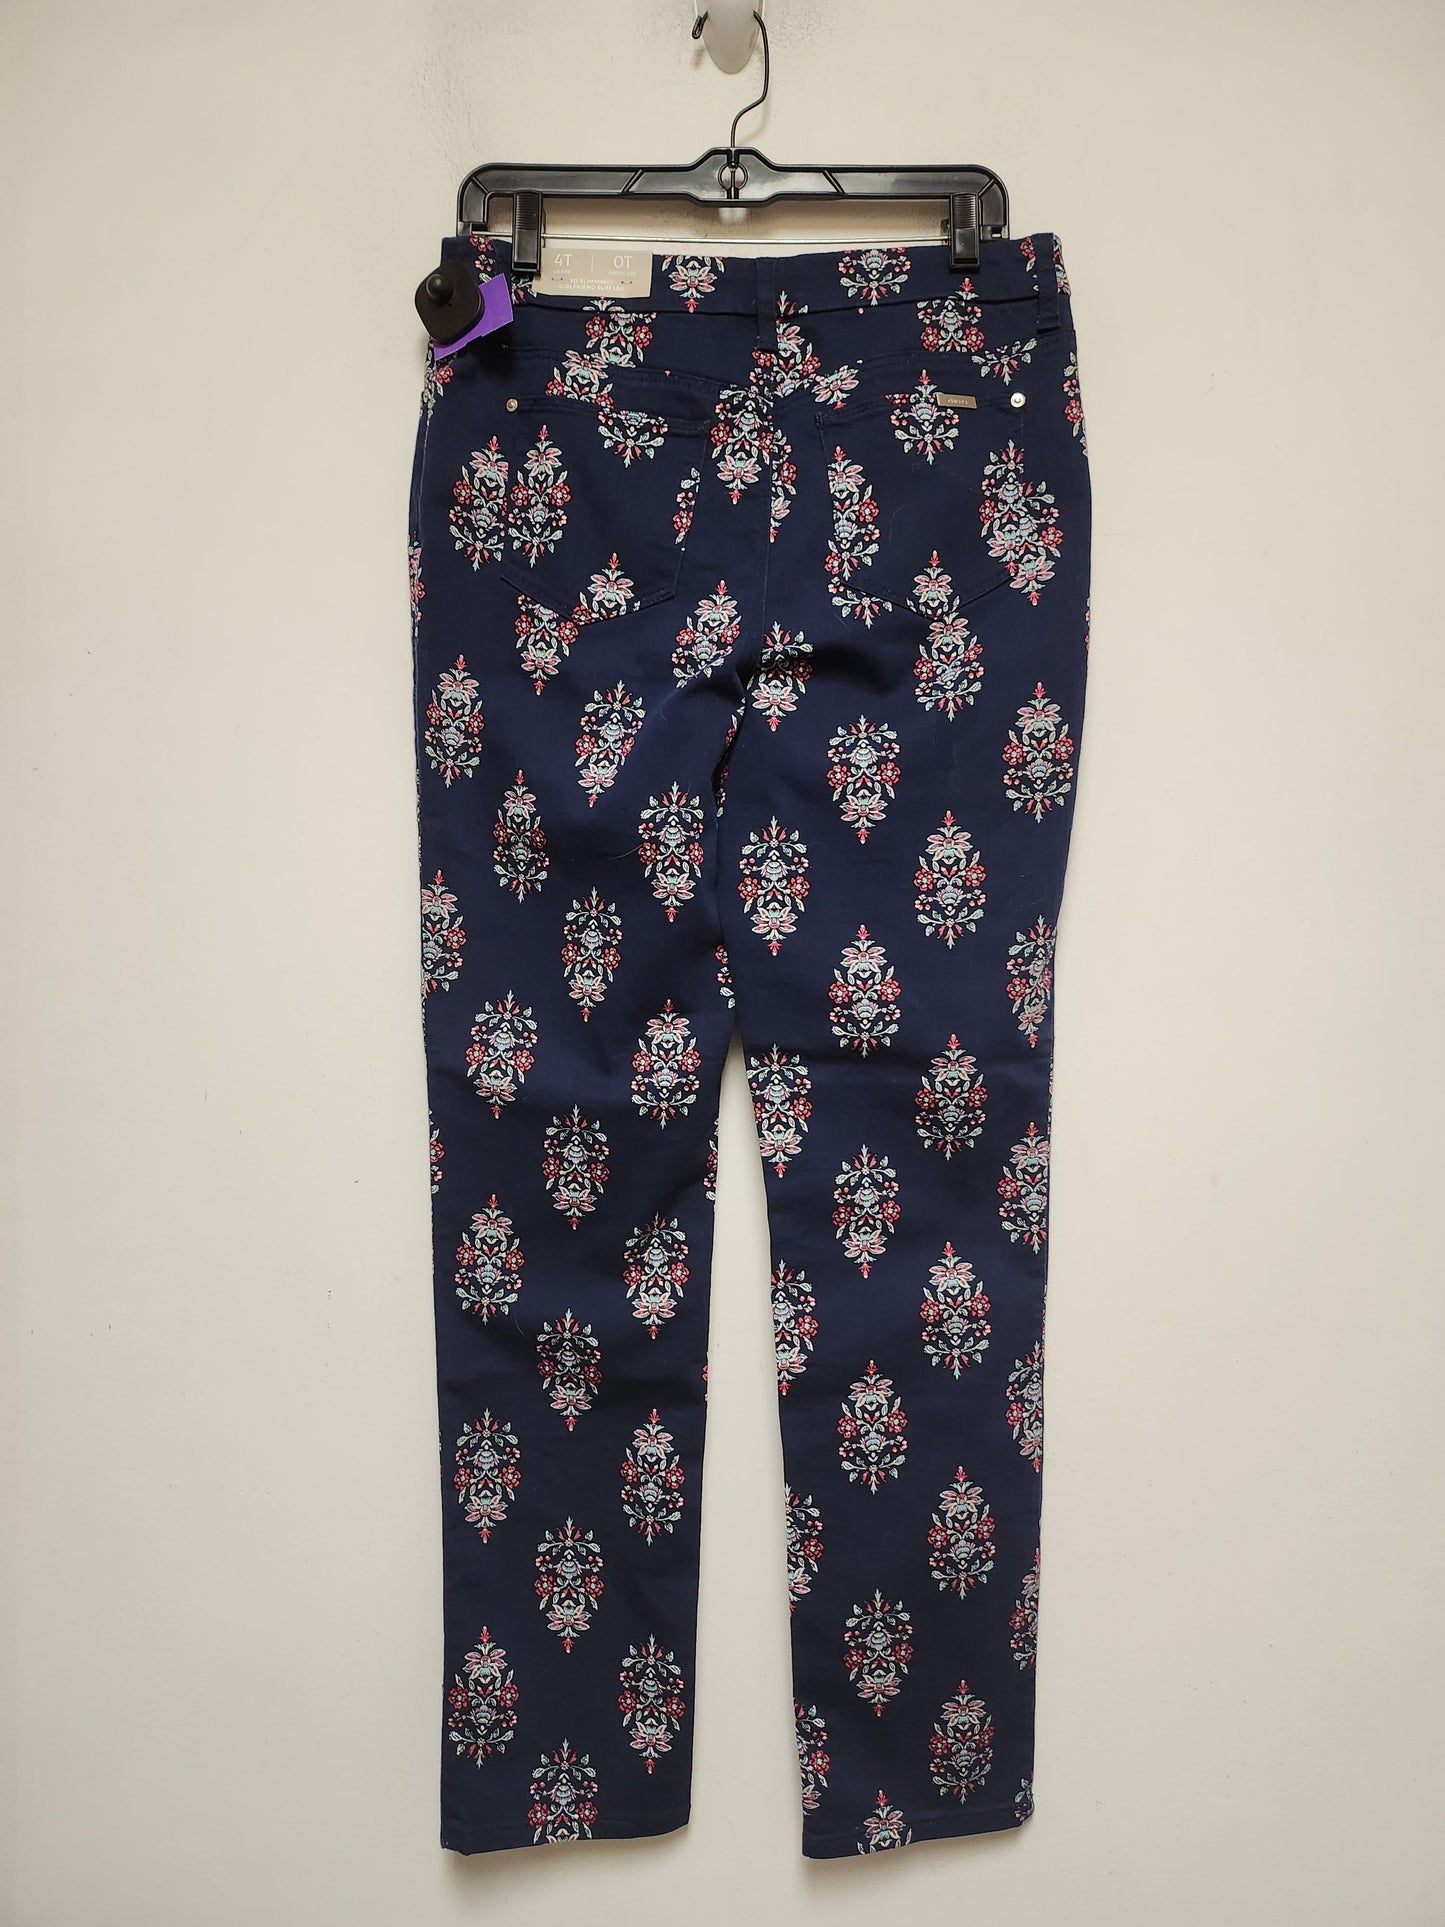 Floral Print Pants Other Chicos, Size 4